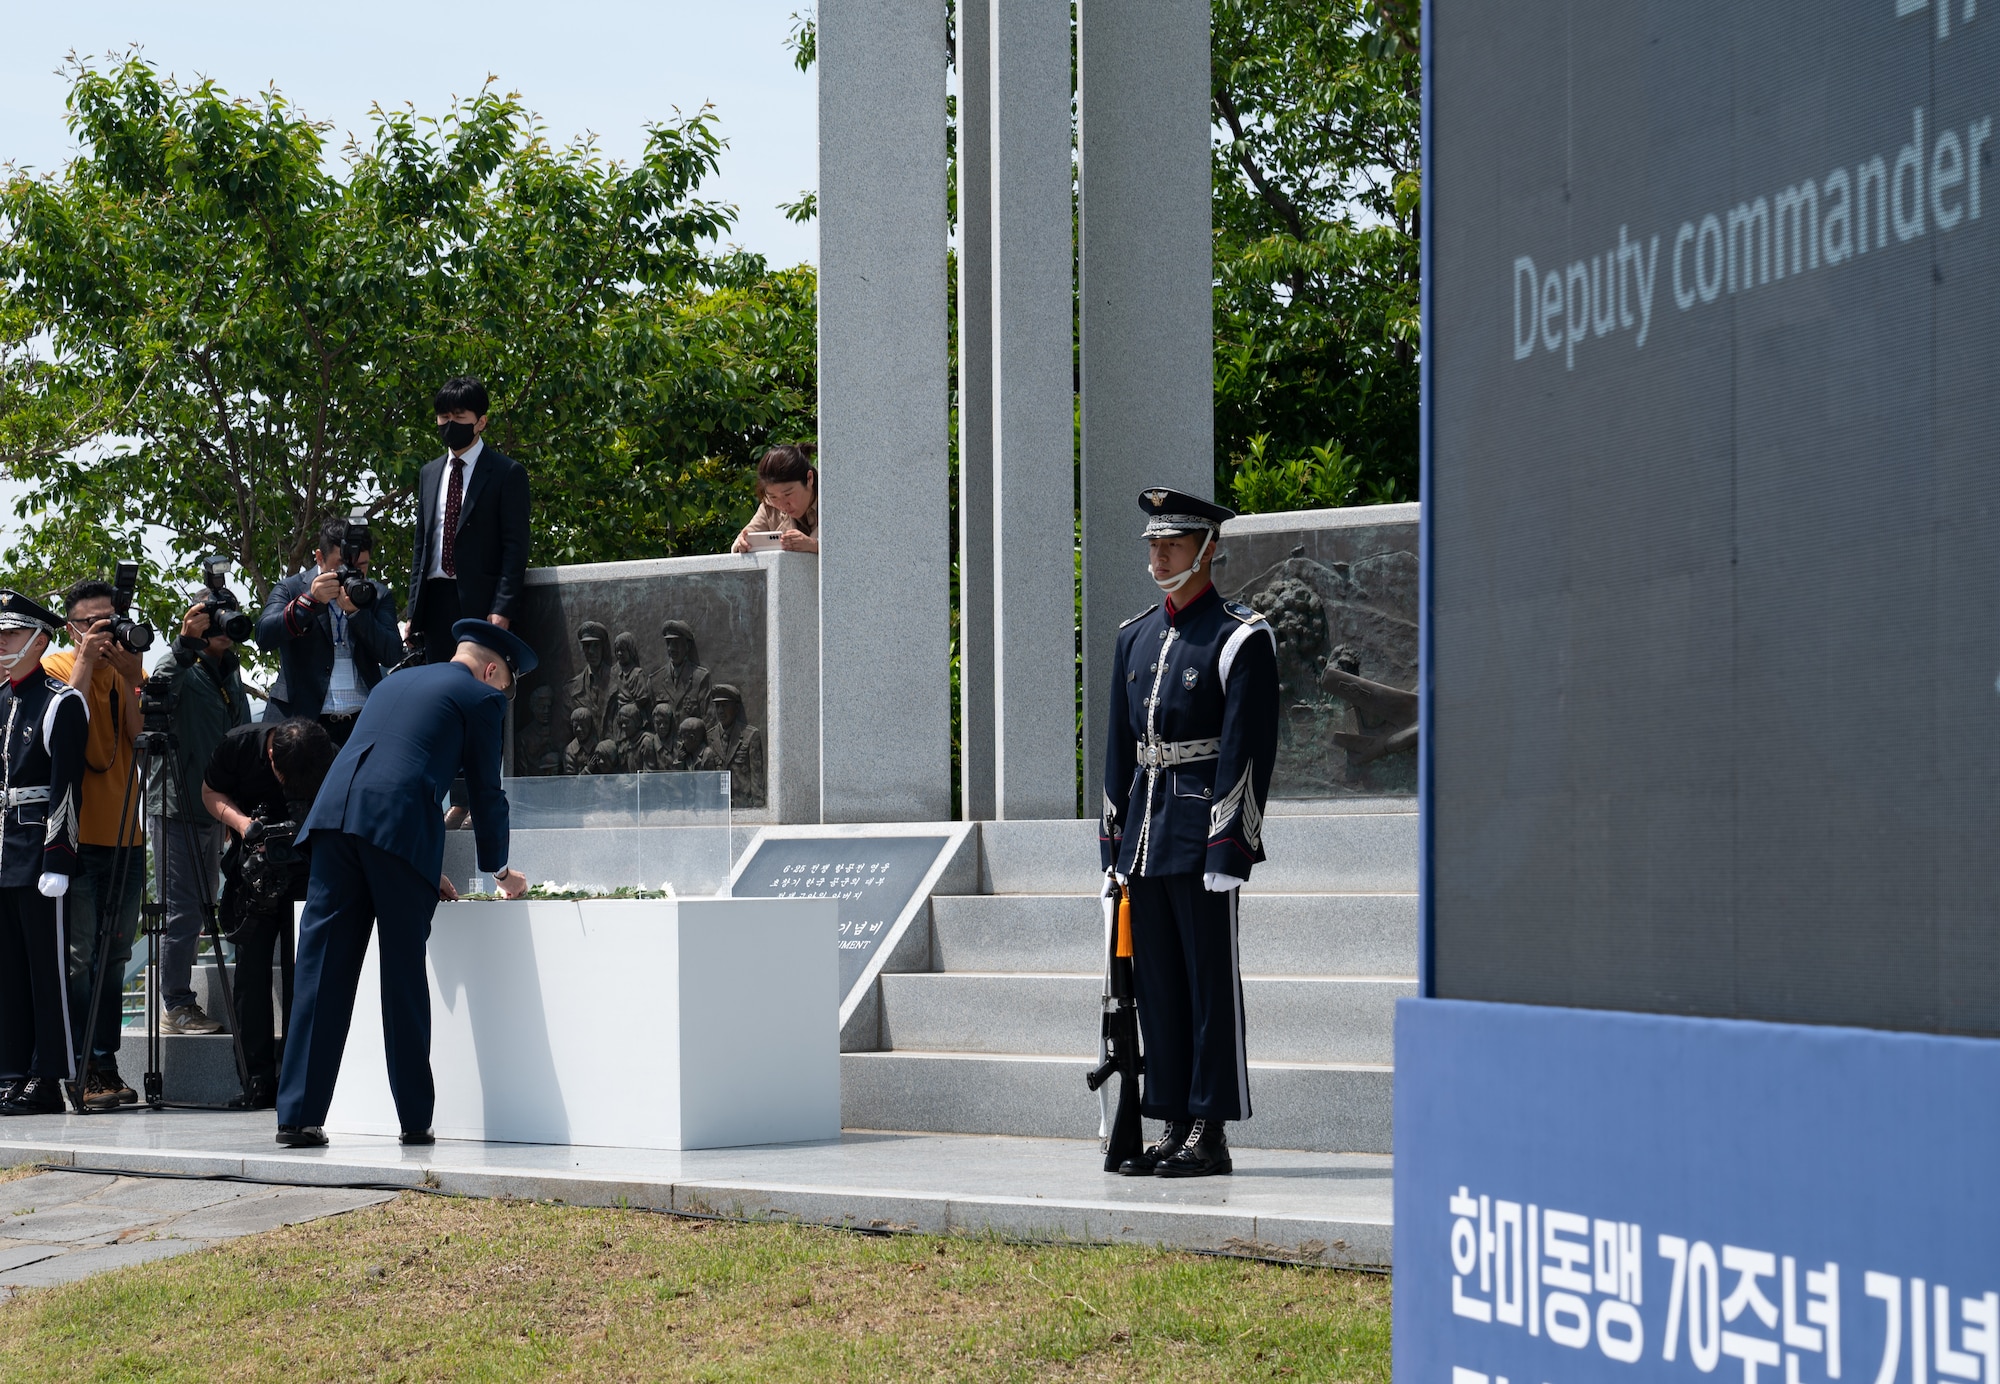 U.S. Air Force Brig. Gen. Ryan P. Keeney, 7th Air Force deputy commander, places flowers on retired Col. Dean Hess’ monument during the Commemorative Dean Hess Ceremony at Jeju Aerospace Museum, Jeju, Republic of Korea, May 11, 2023.